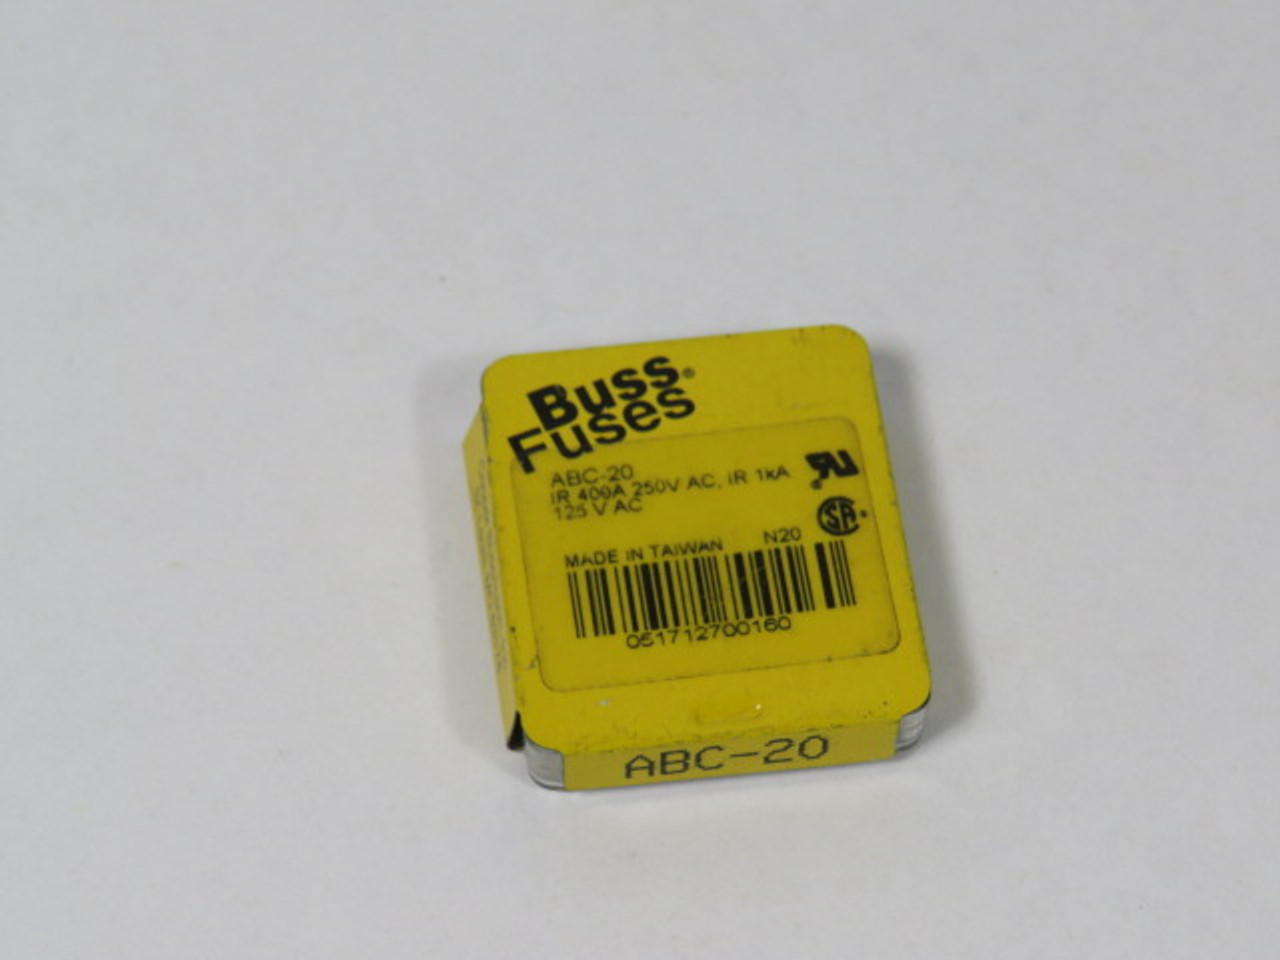 Bussmann ABC-20 Fast Acting Fuse 20A 250V 5-Pack ! NEW !